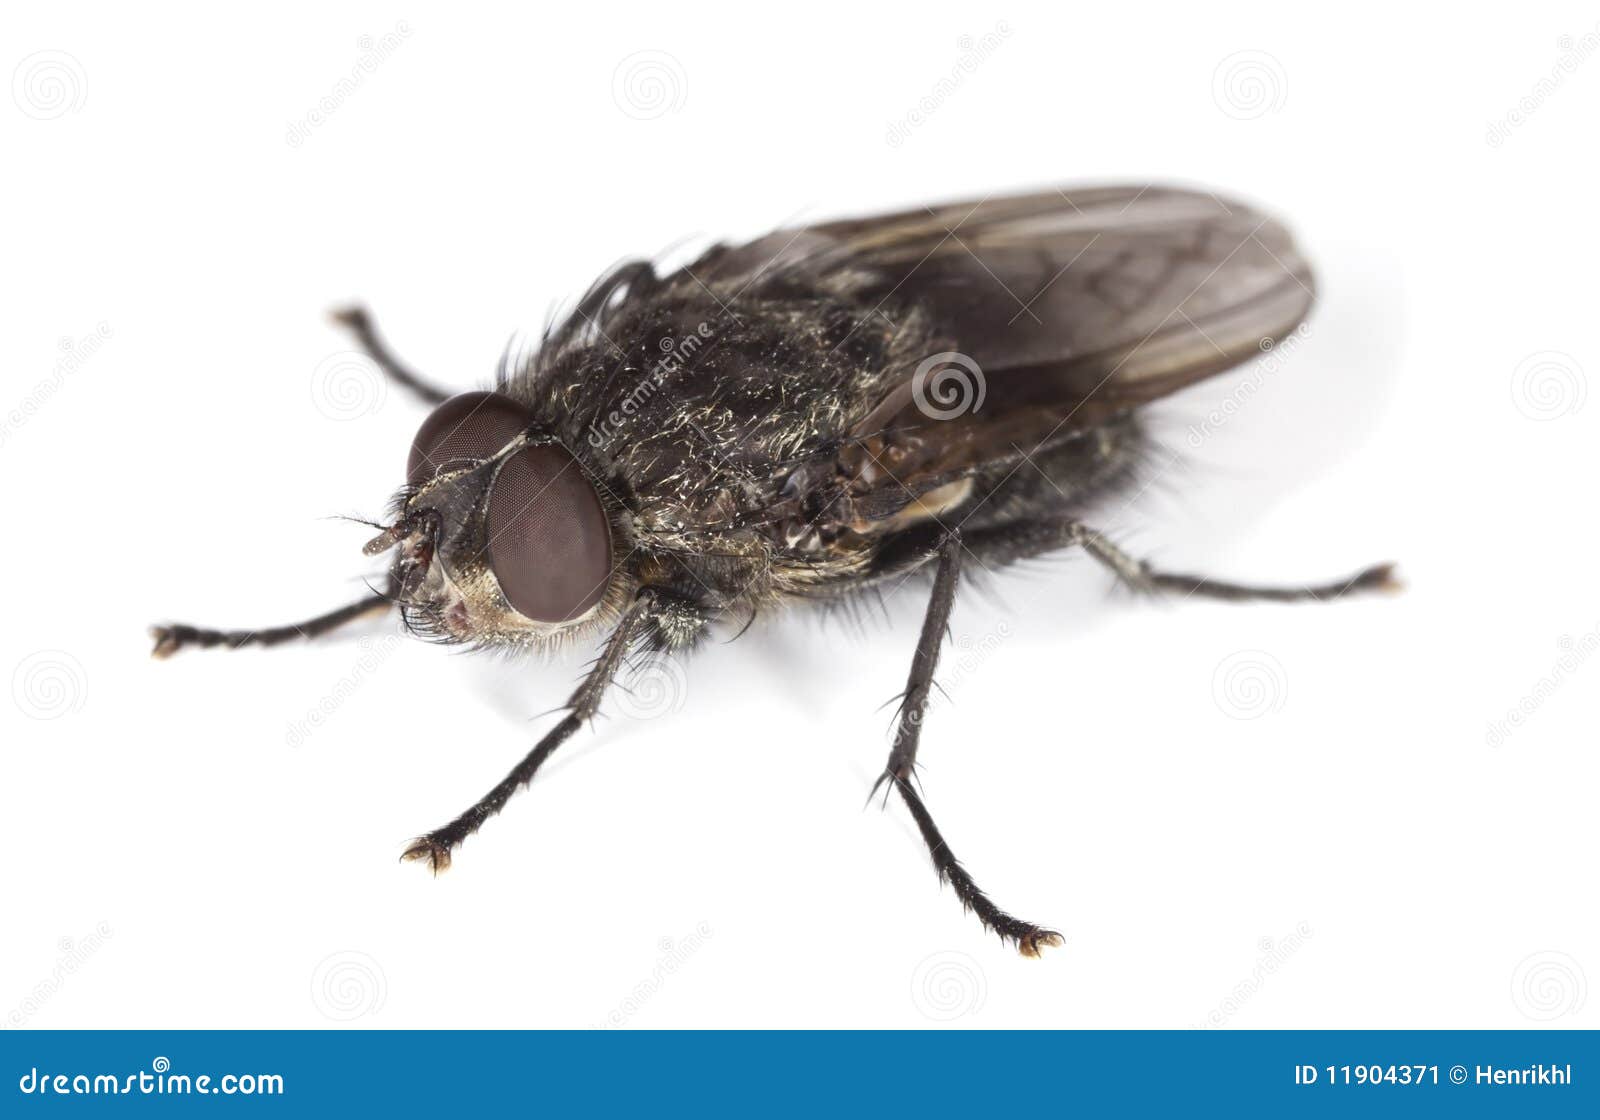 https://thumbs.dreamstime.com/z/extreme-close-up-house-fly-isolated-white-11904371.jpg